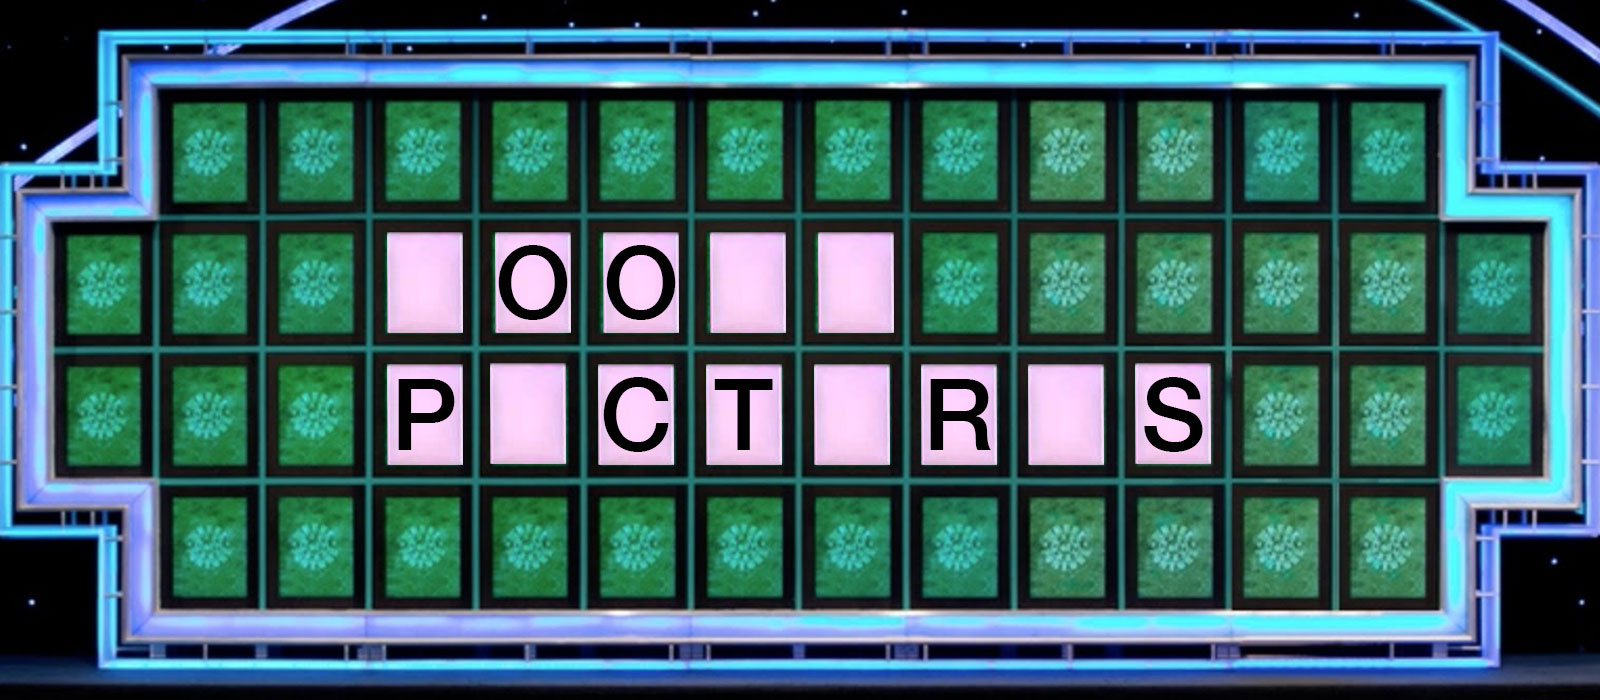 Can You Solve These Wheel of Fortune Puzzles? Quiz 1414